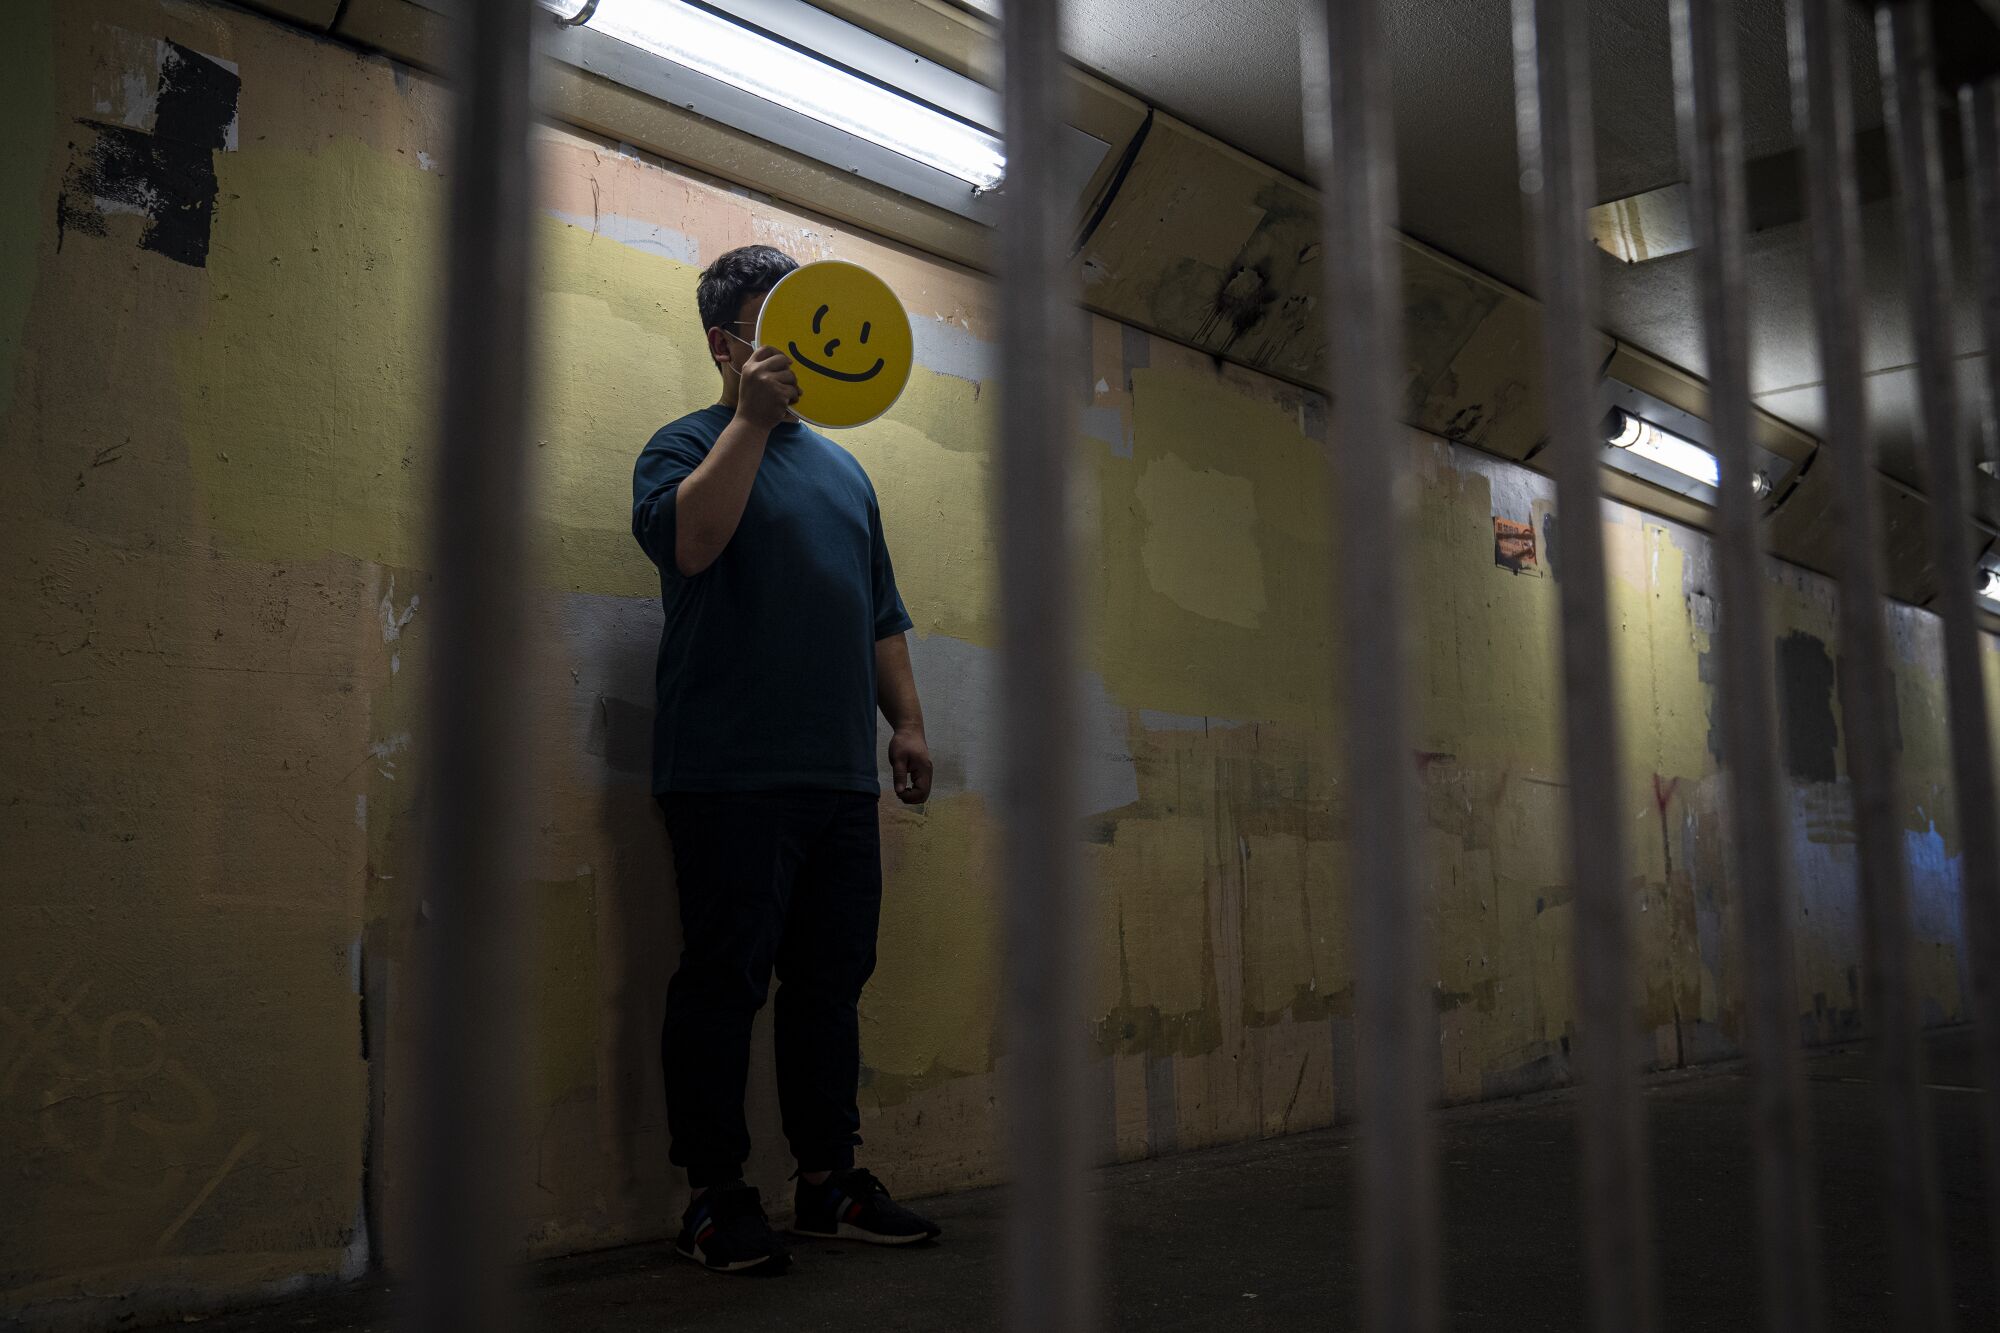 A man holds a yellow smiley face sign in front of his face in a dimly lit hallway, seen through metal bars